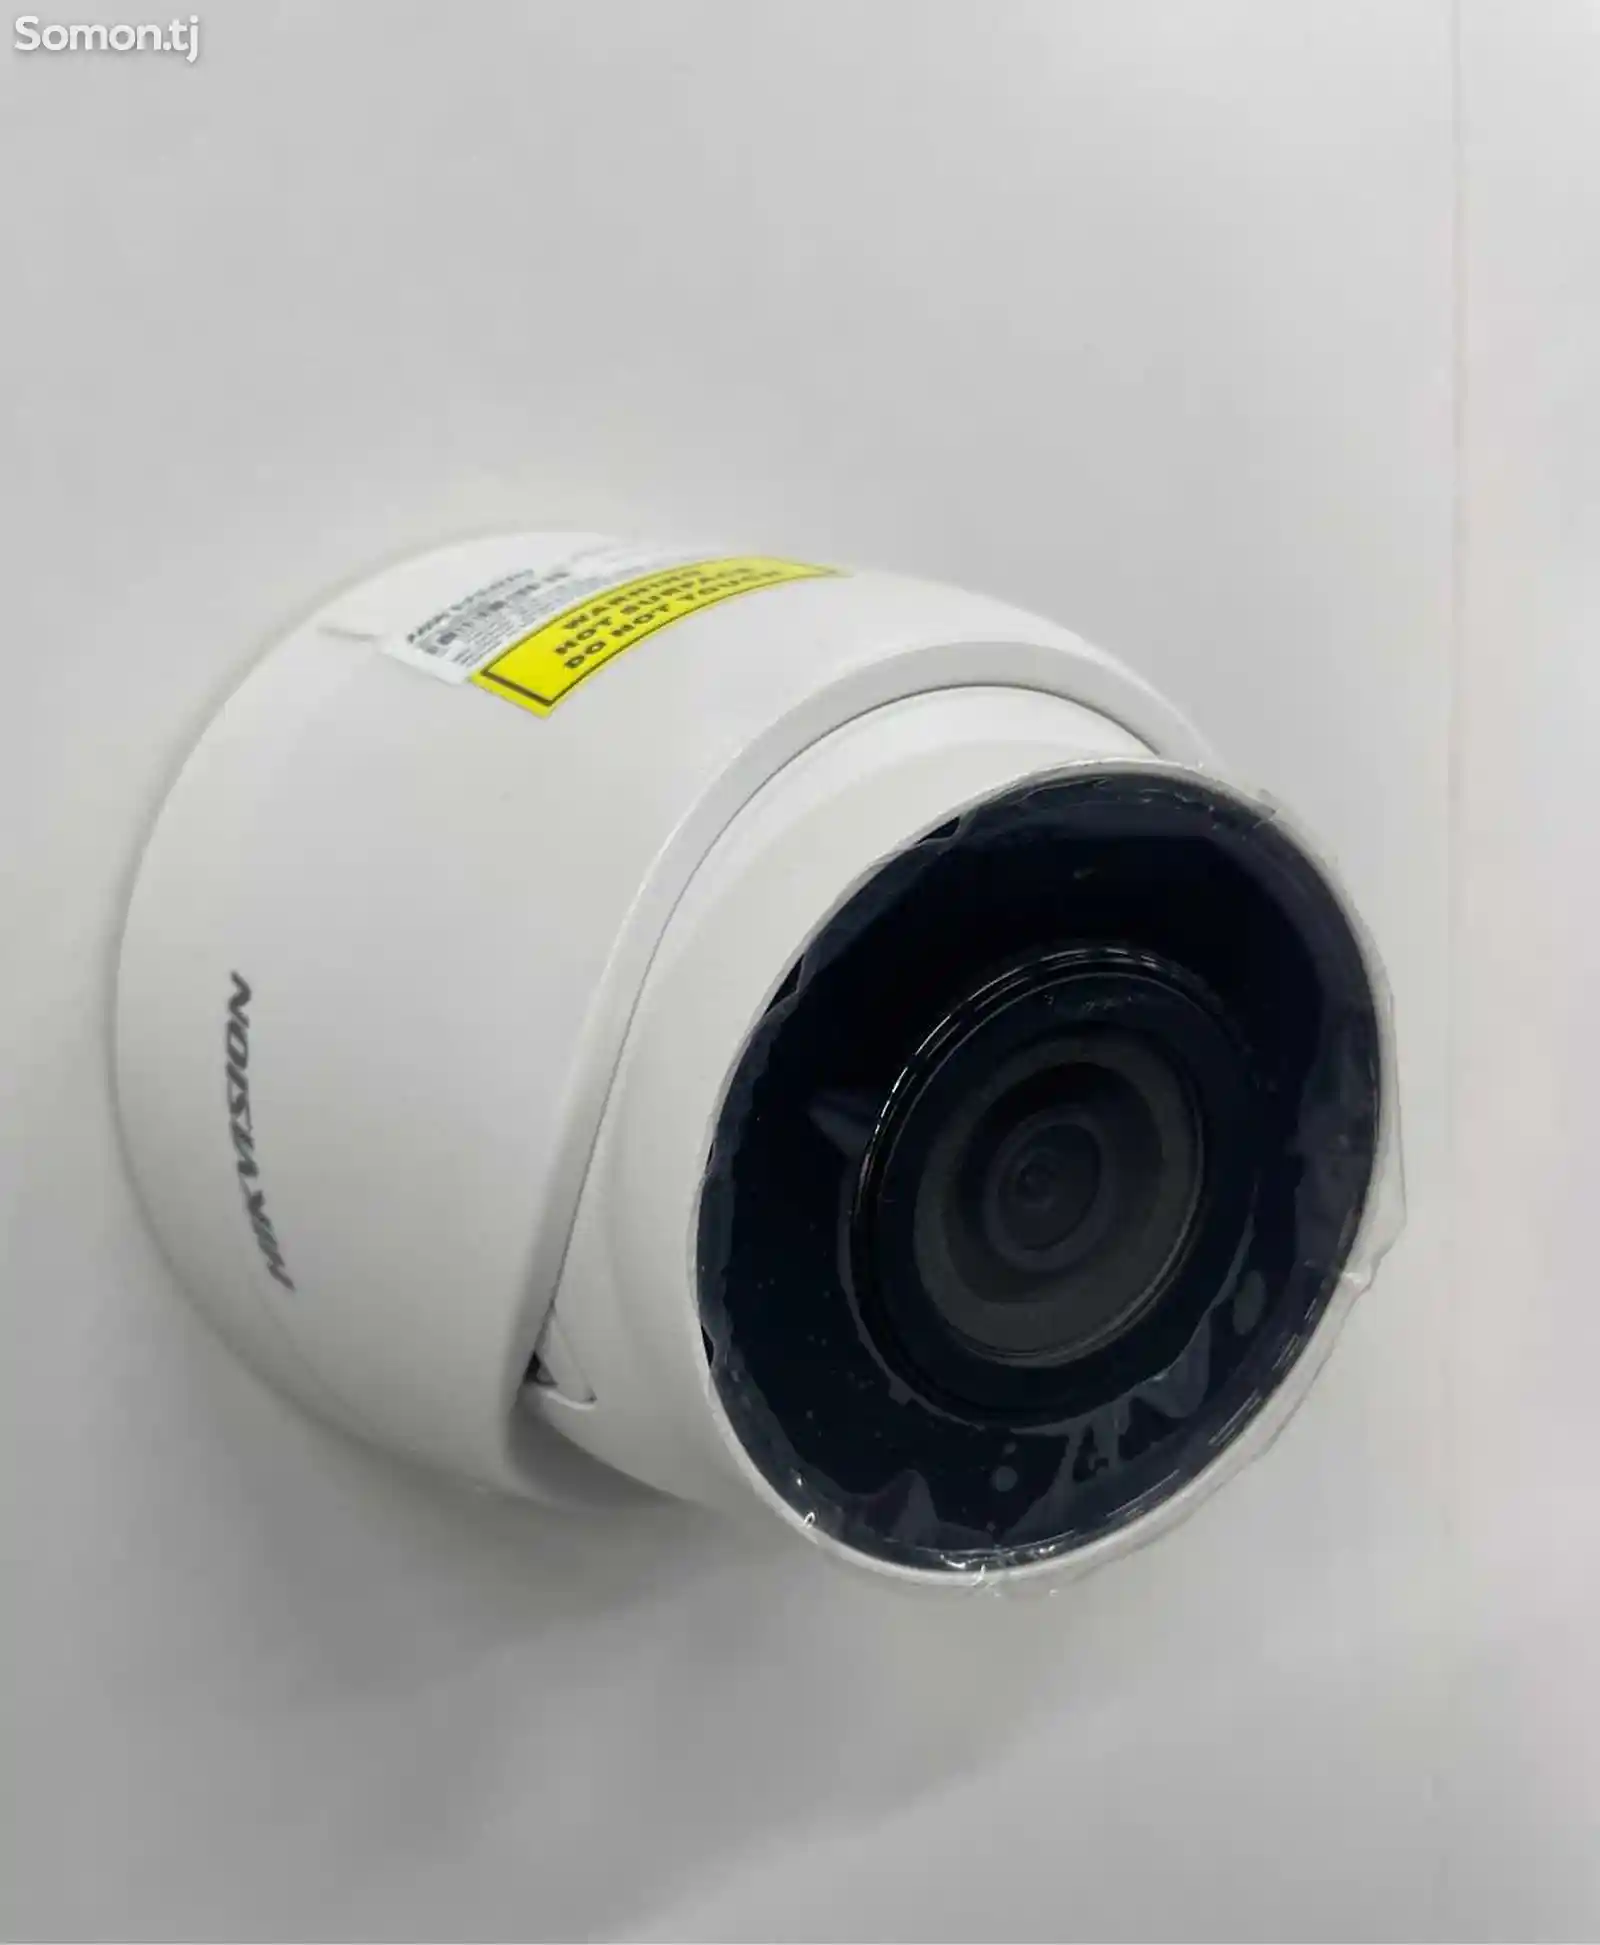 Камера Hikvision DS-2CD1323G2-IUF